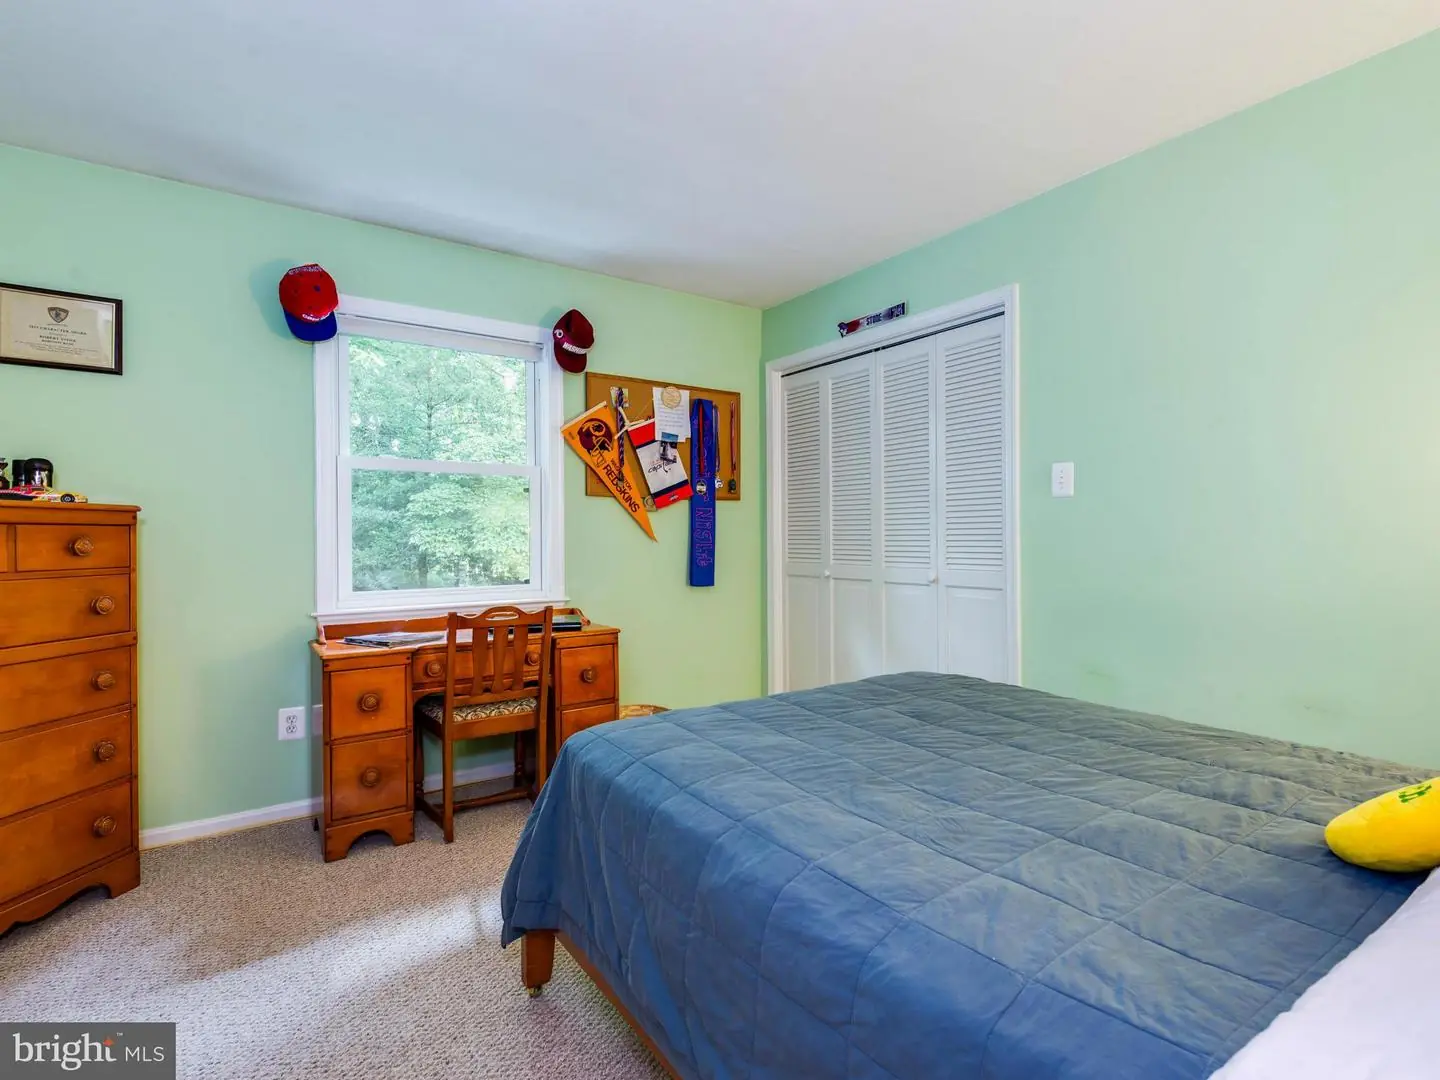 1003712923-300761235416-2021-09-07-04-59-50  |   | Falls Church Delaware Real Estate For Sale | MLS# 1003712923  - Best of Northern Virginia